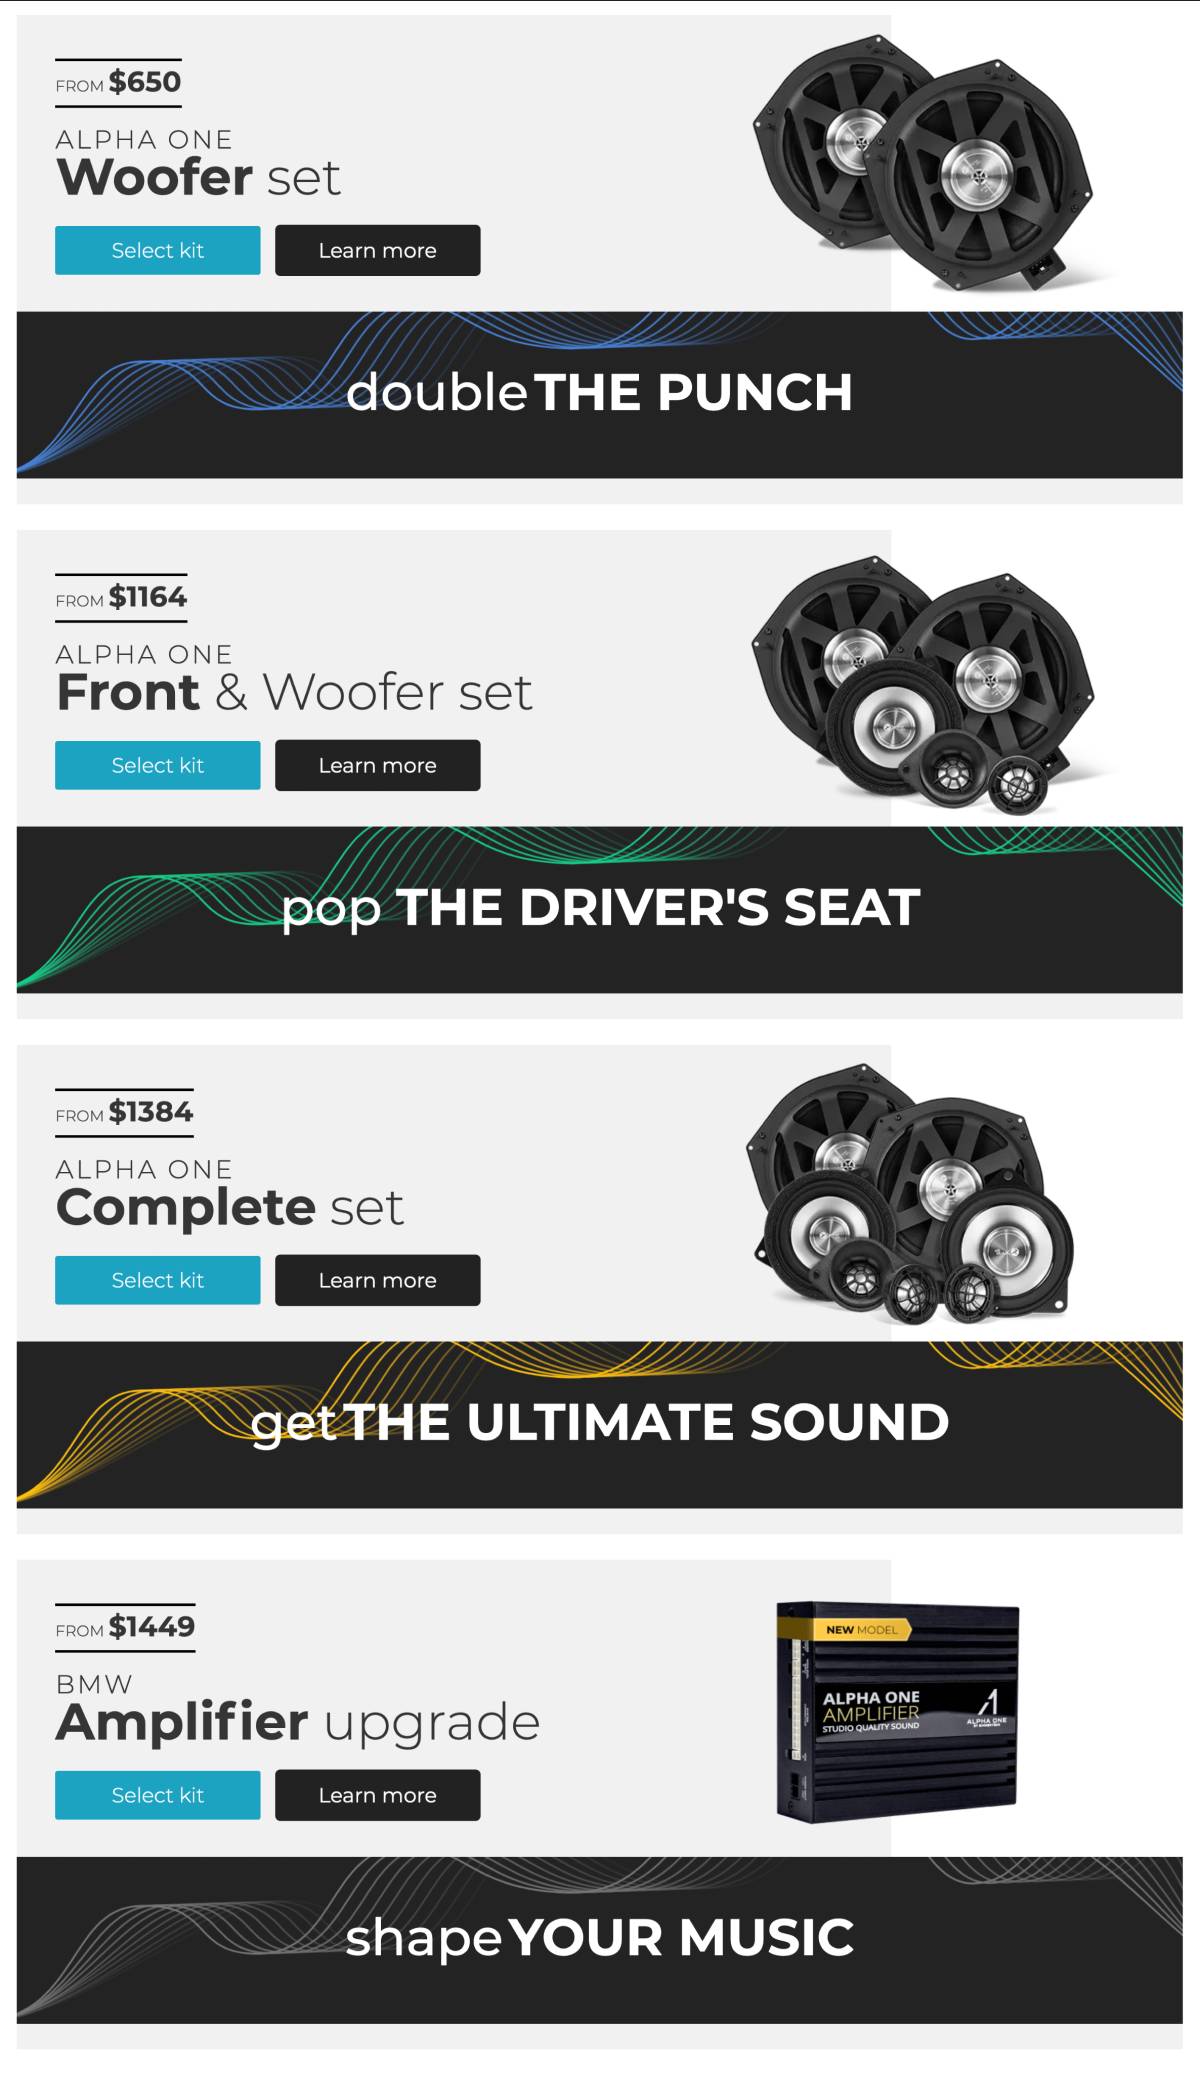 Available personalized sound system options